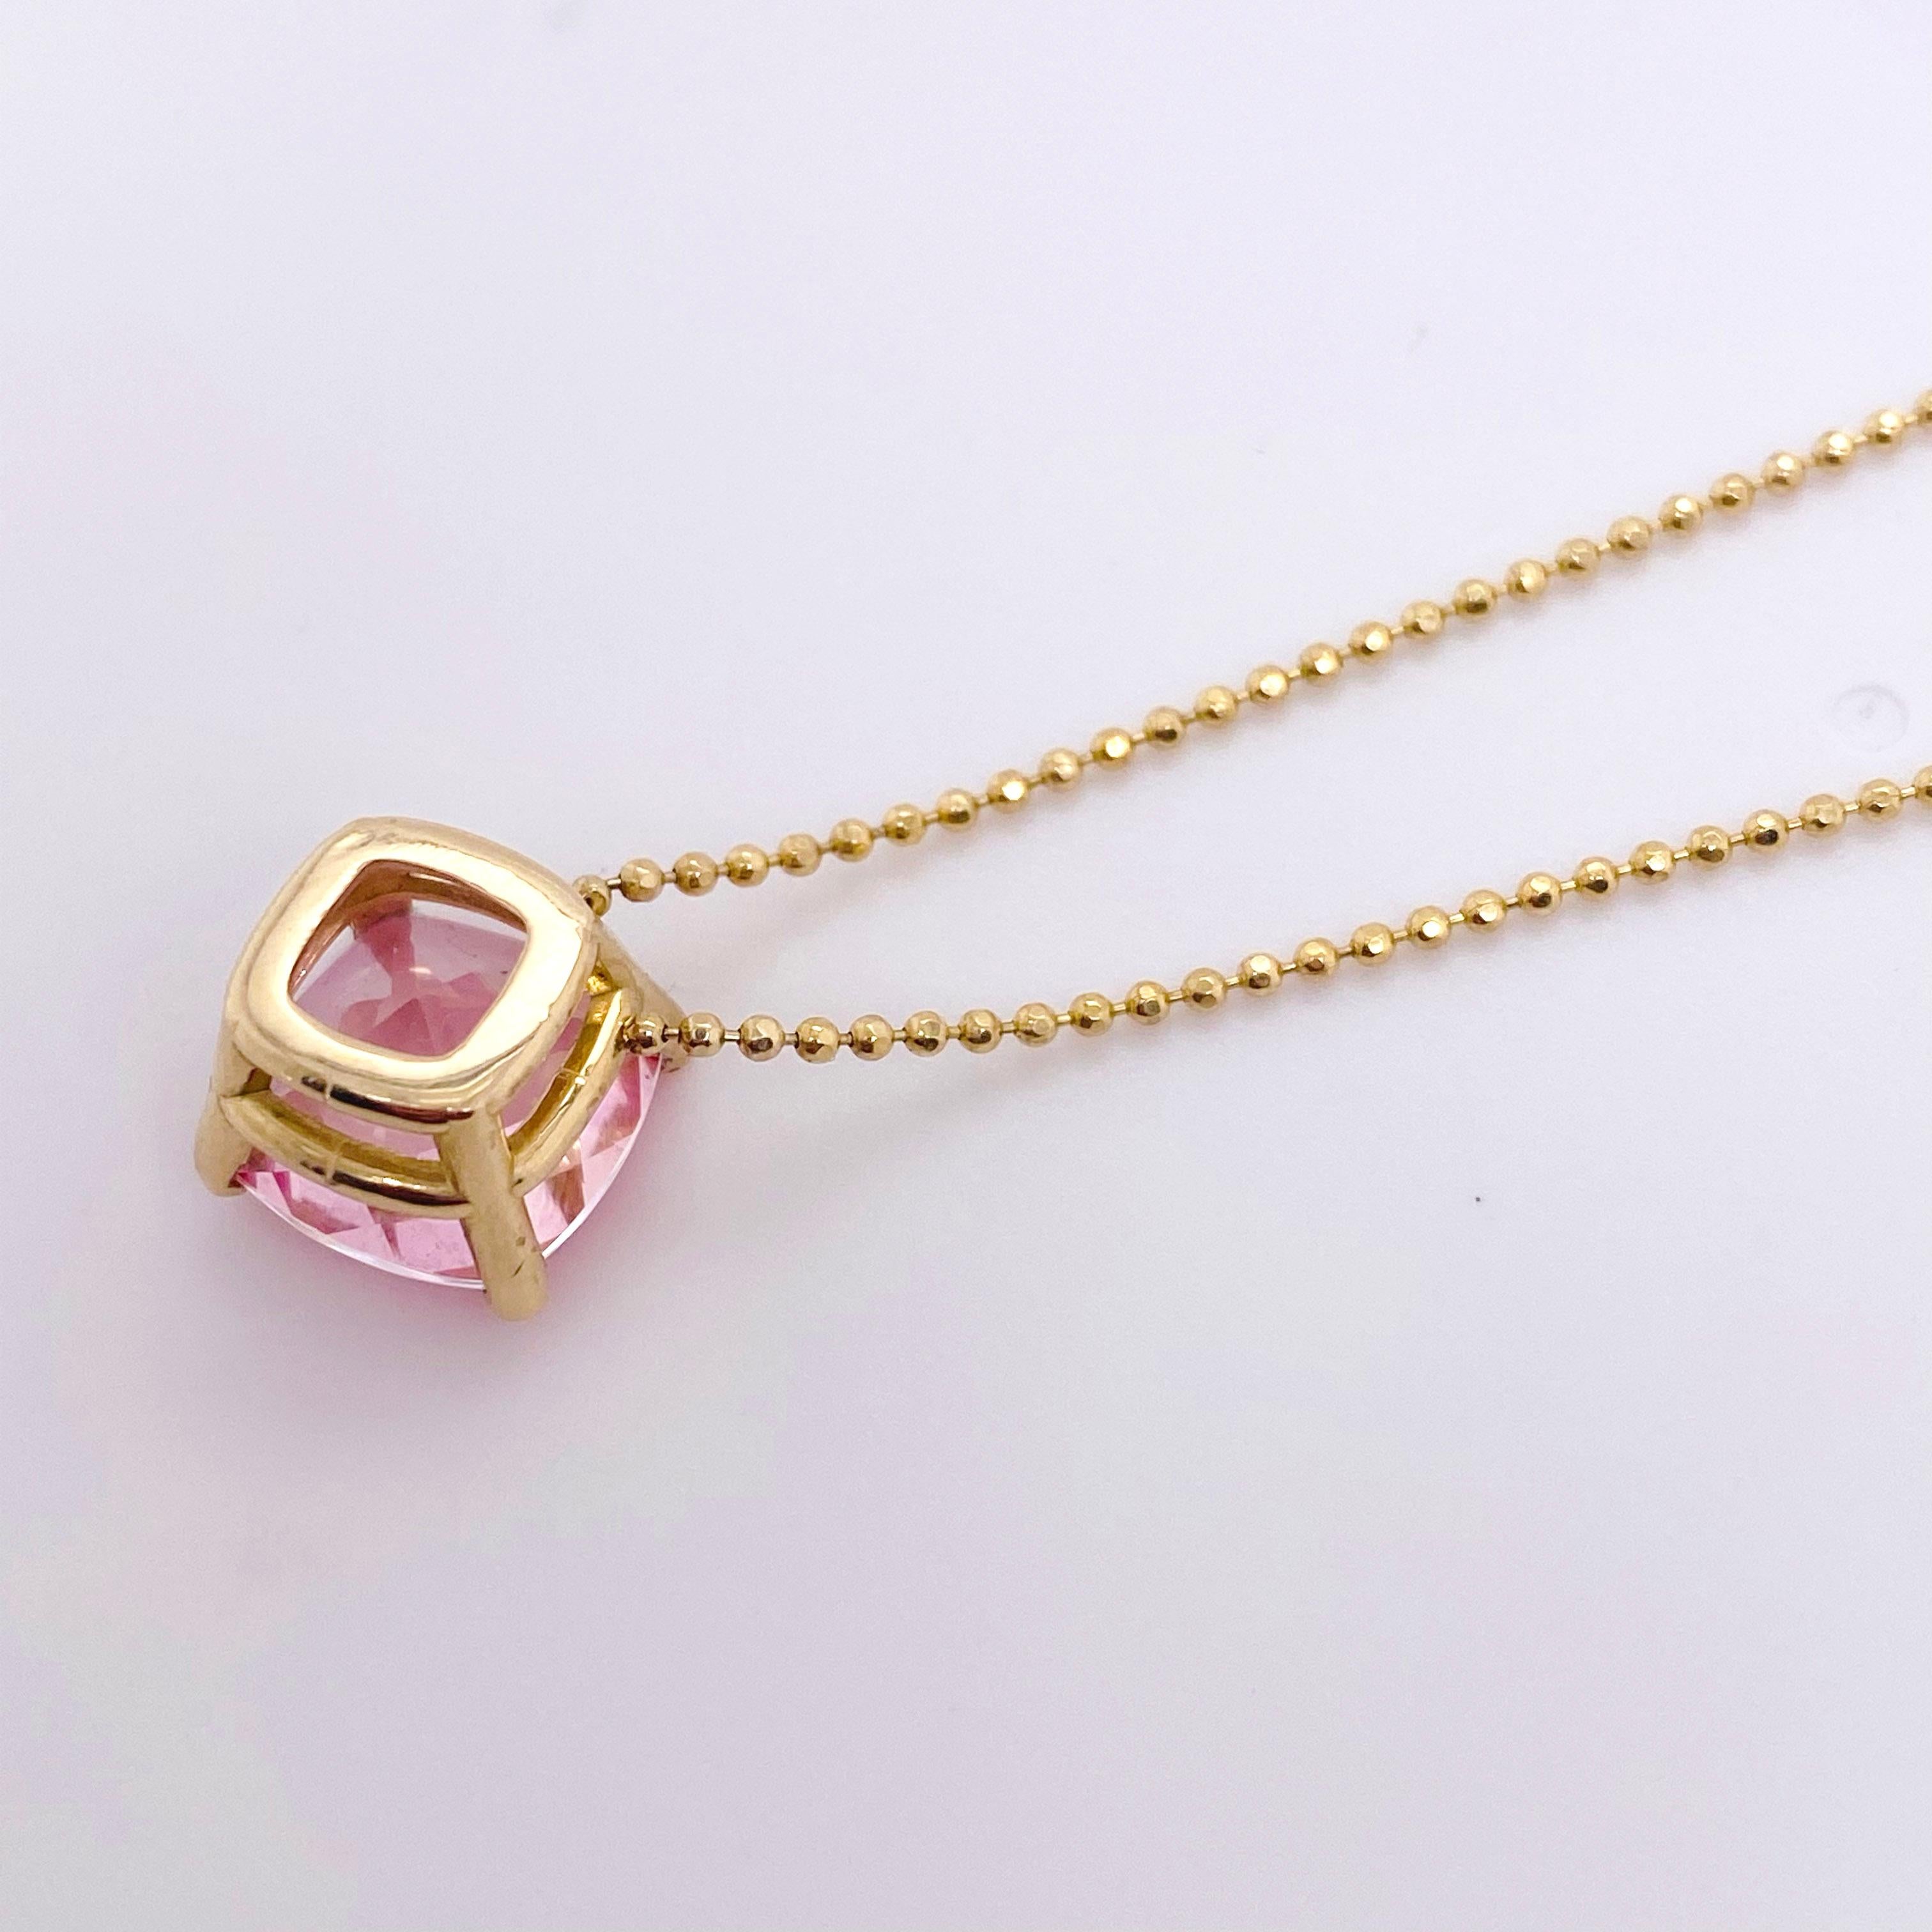 Cushion Cut Pink Topaz Pendant w 5 Ct Cushion Yellow Gold Beaded Chain Necklace For Sale